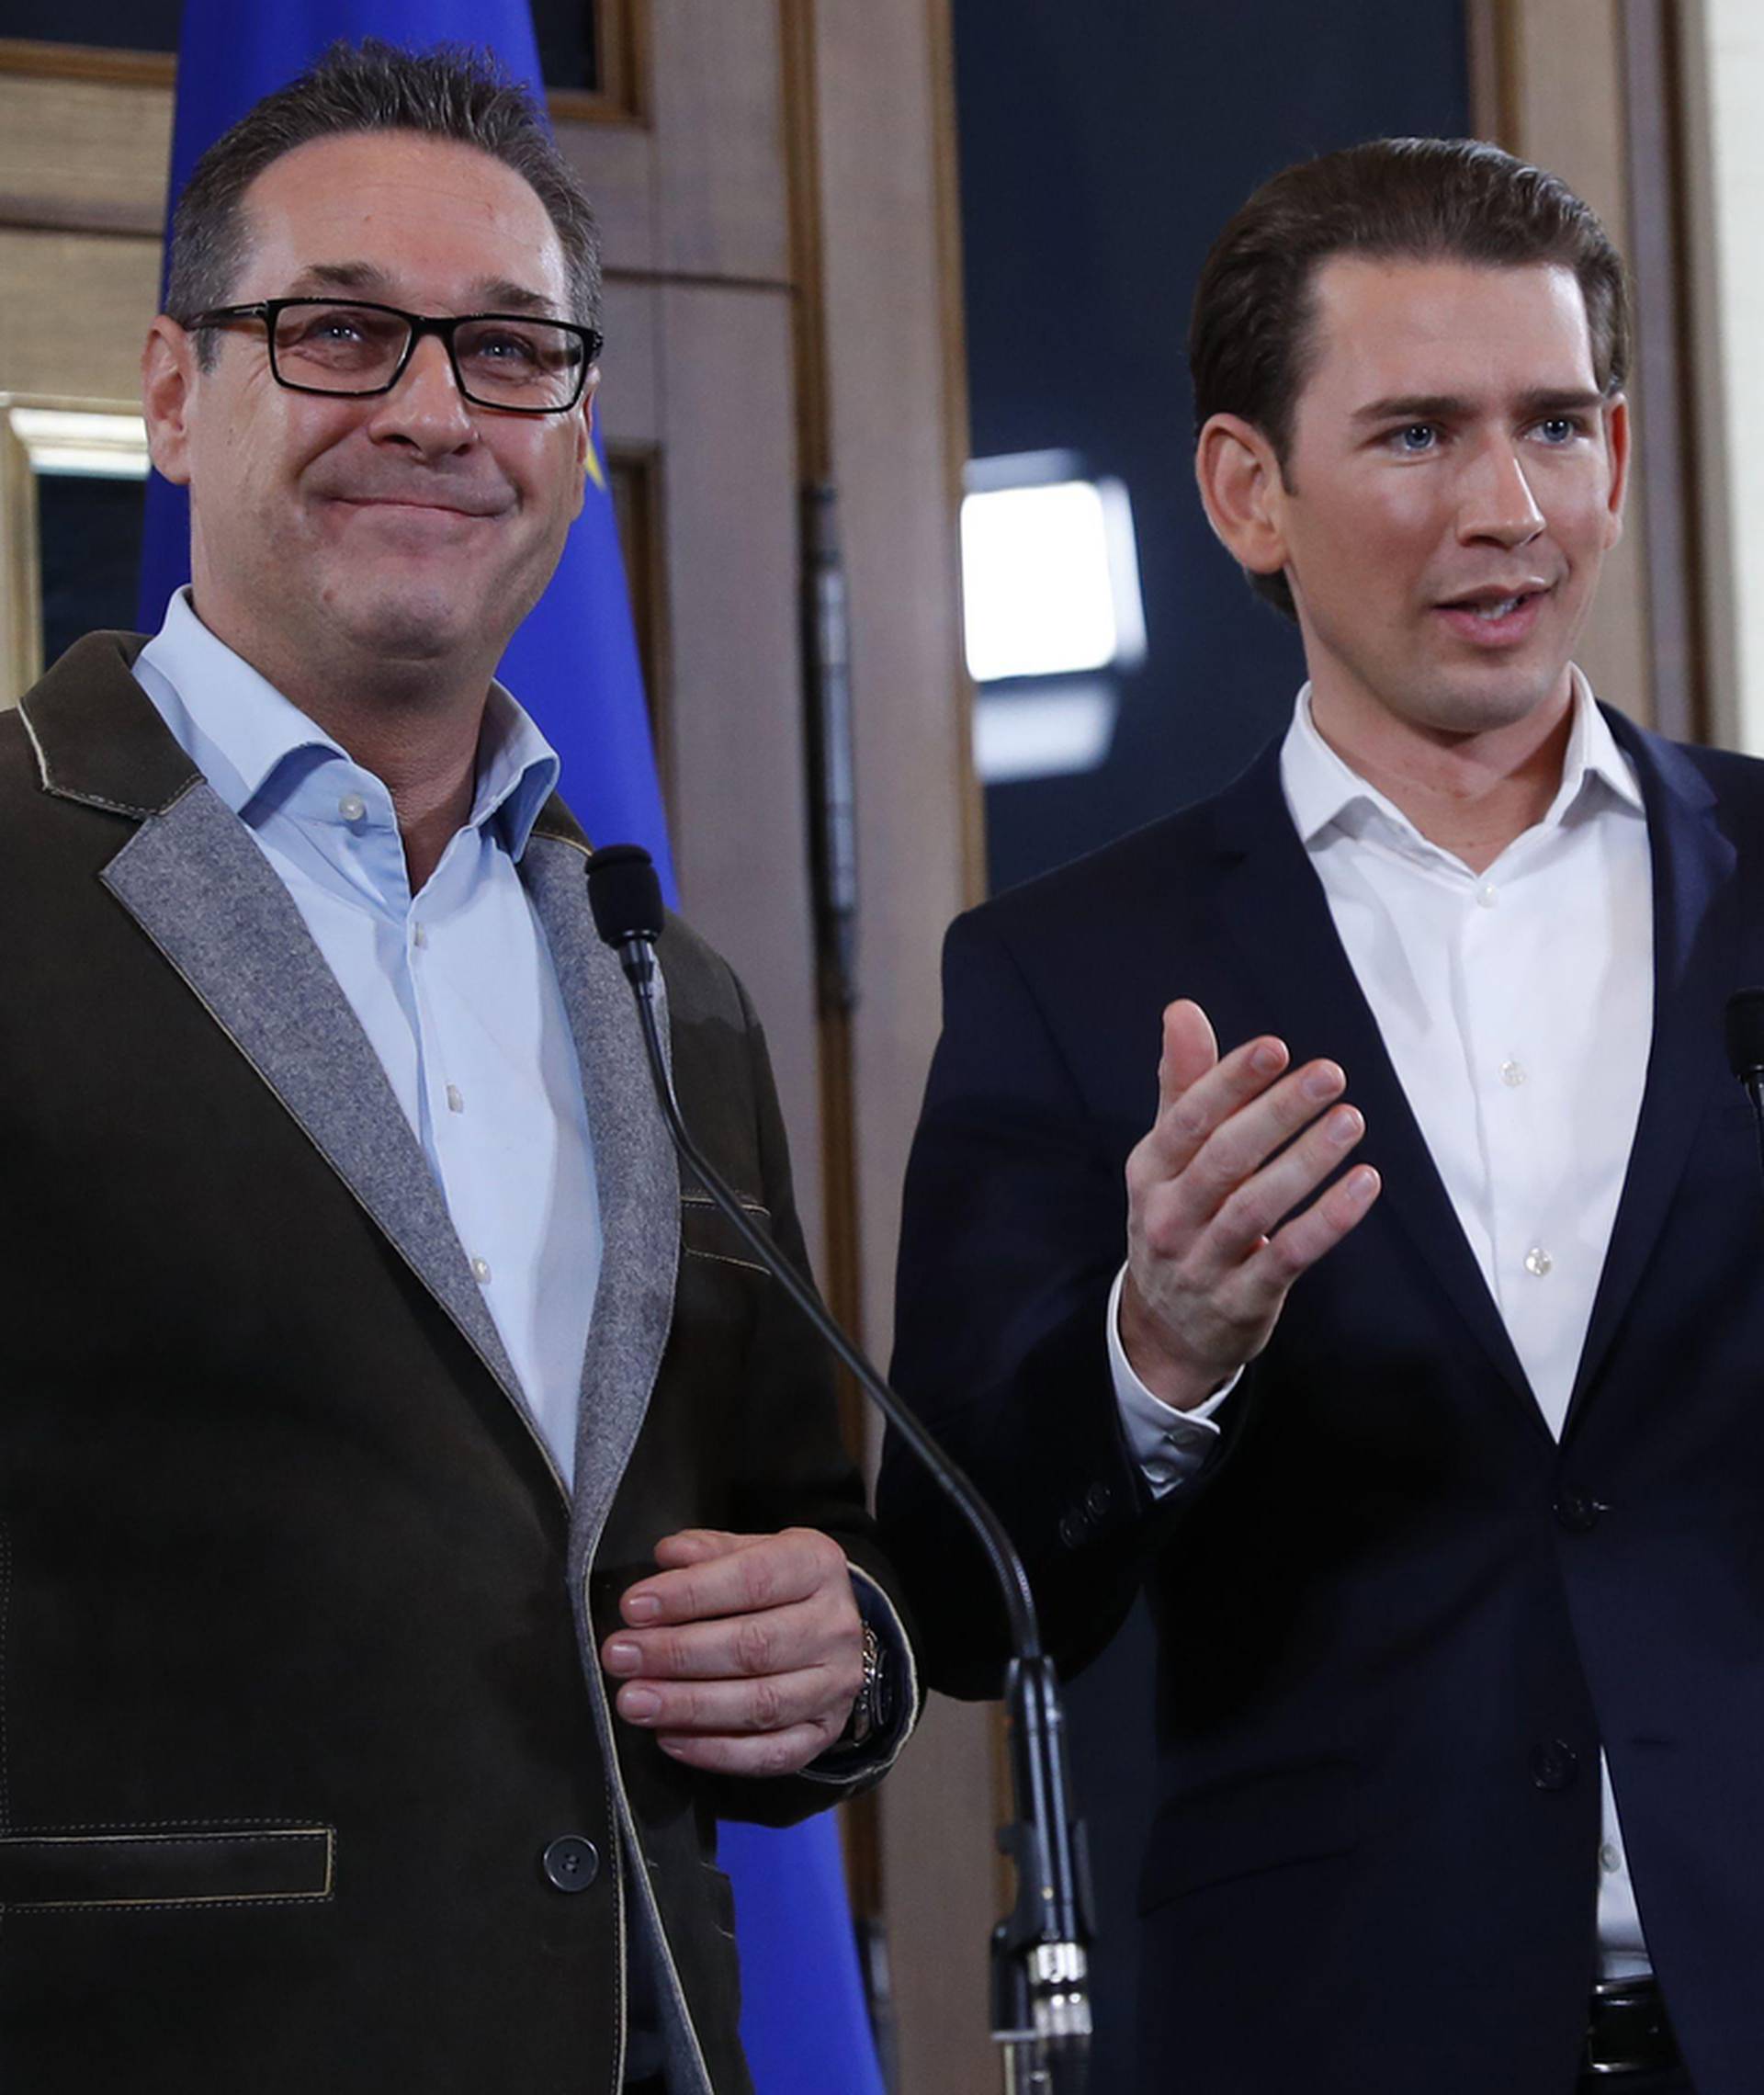 Head of the FPOe Strache and head of the OeVP Kurz address a news conference in Vienna